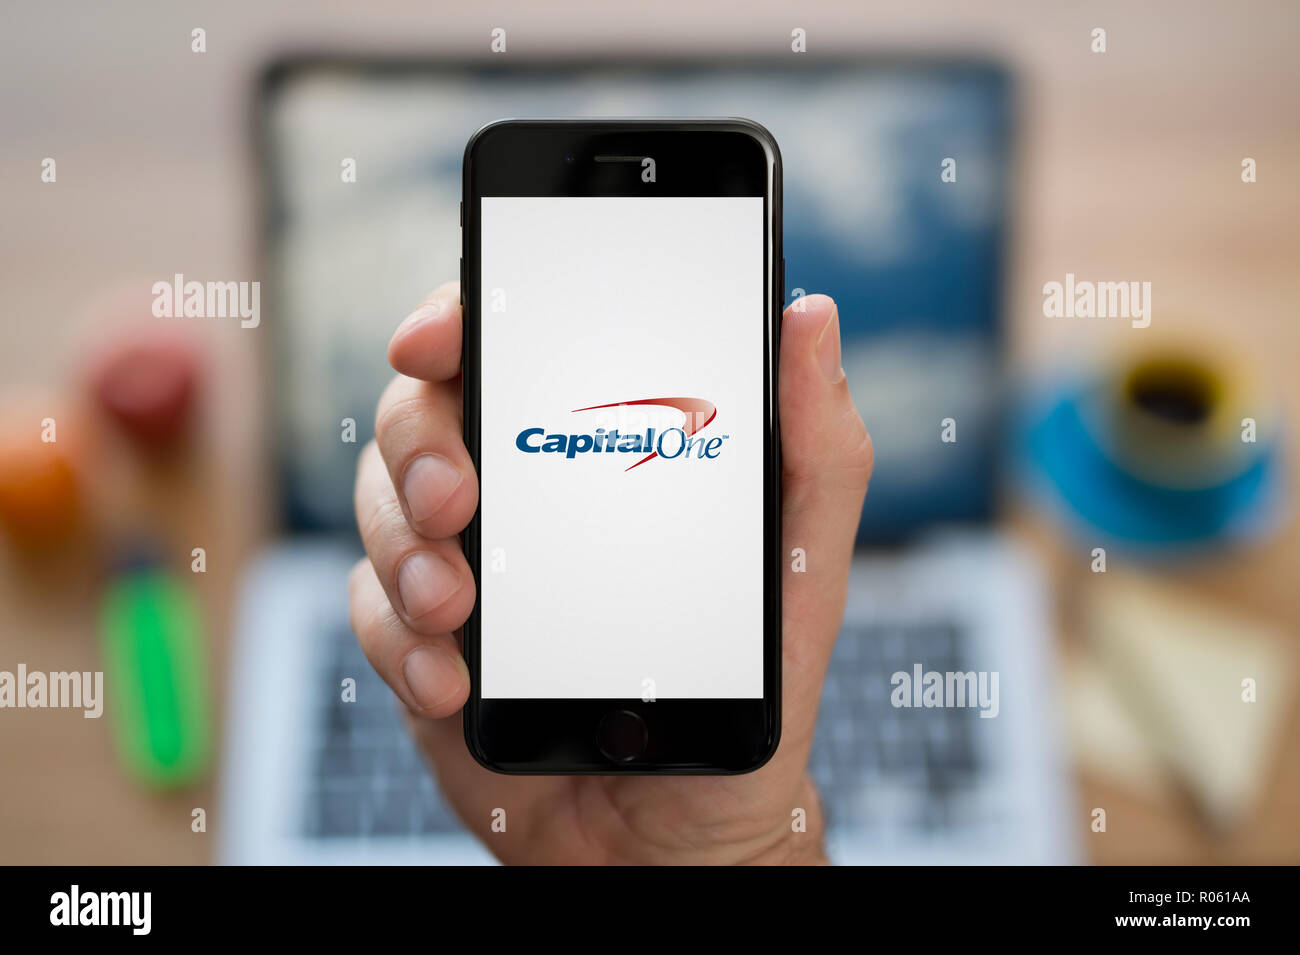 A man looks at his iPhone which displays the Capital One logo, while sat at his computer desk (Editorial use only). Stock Photo